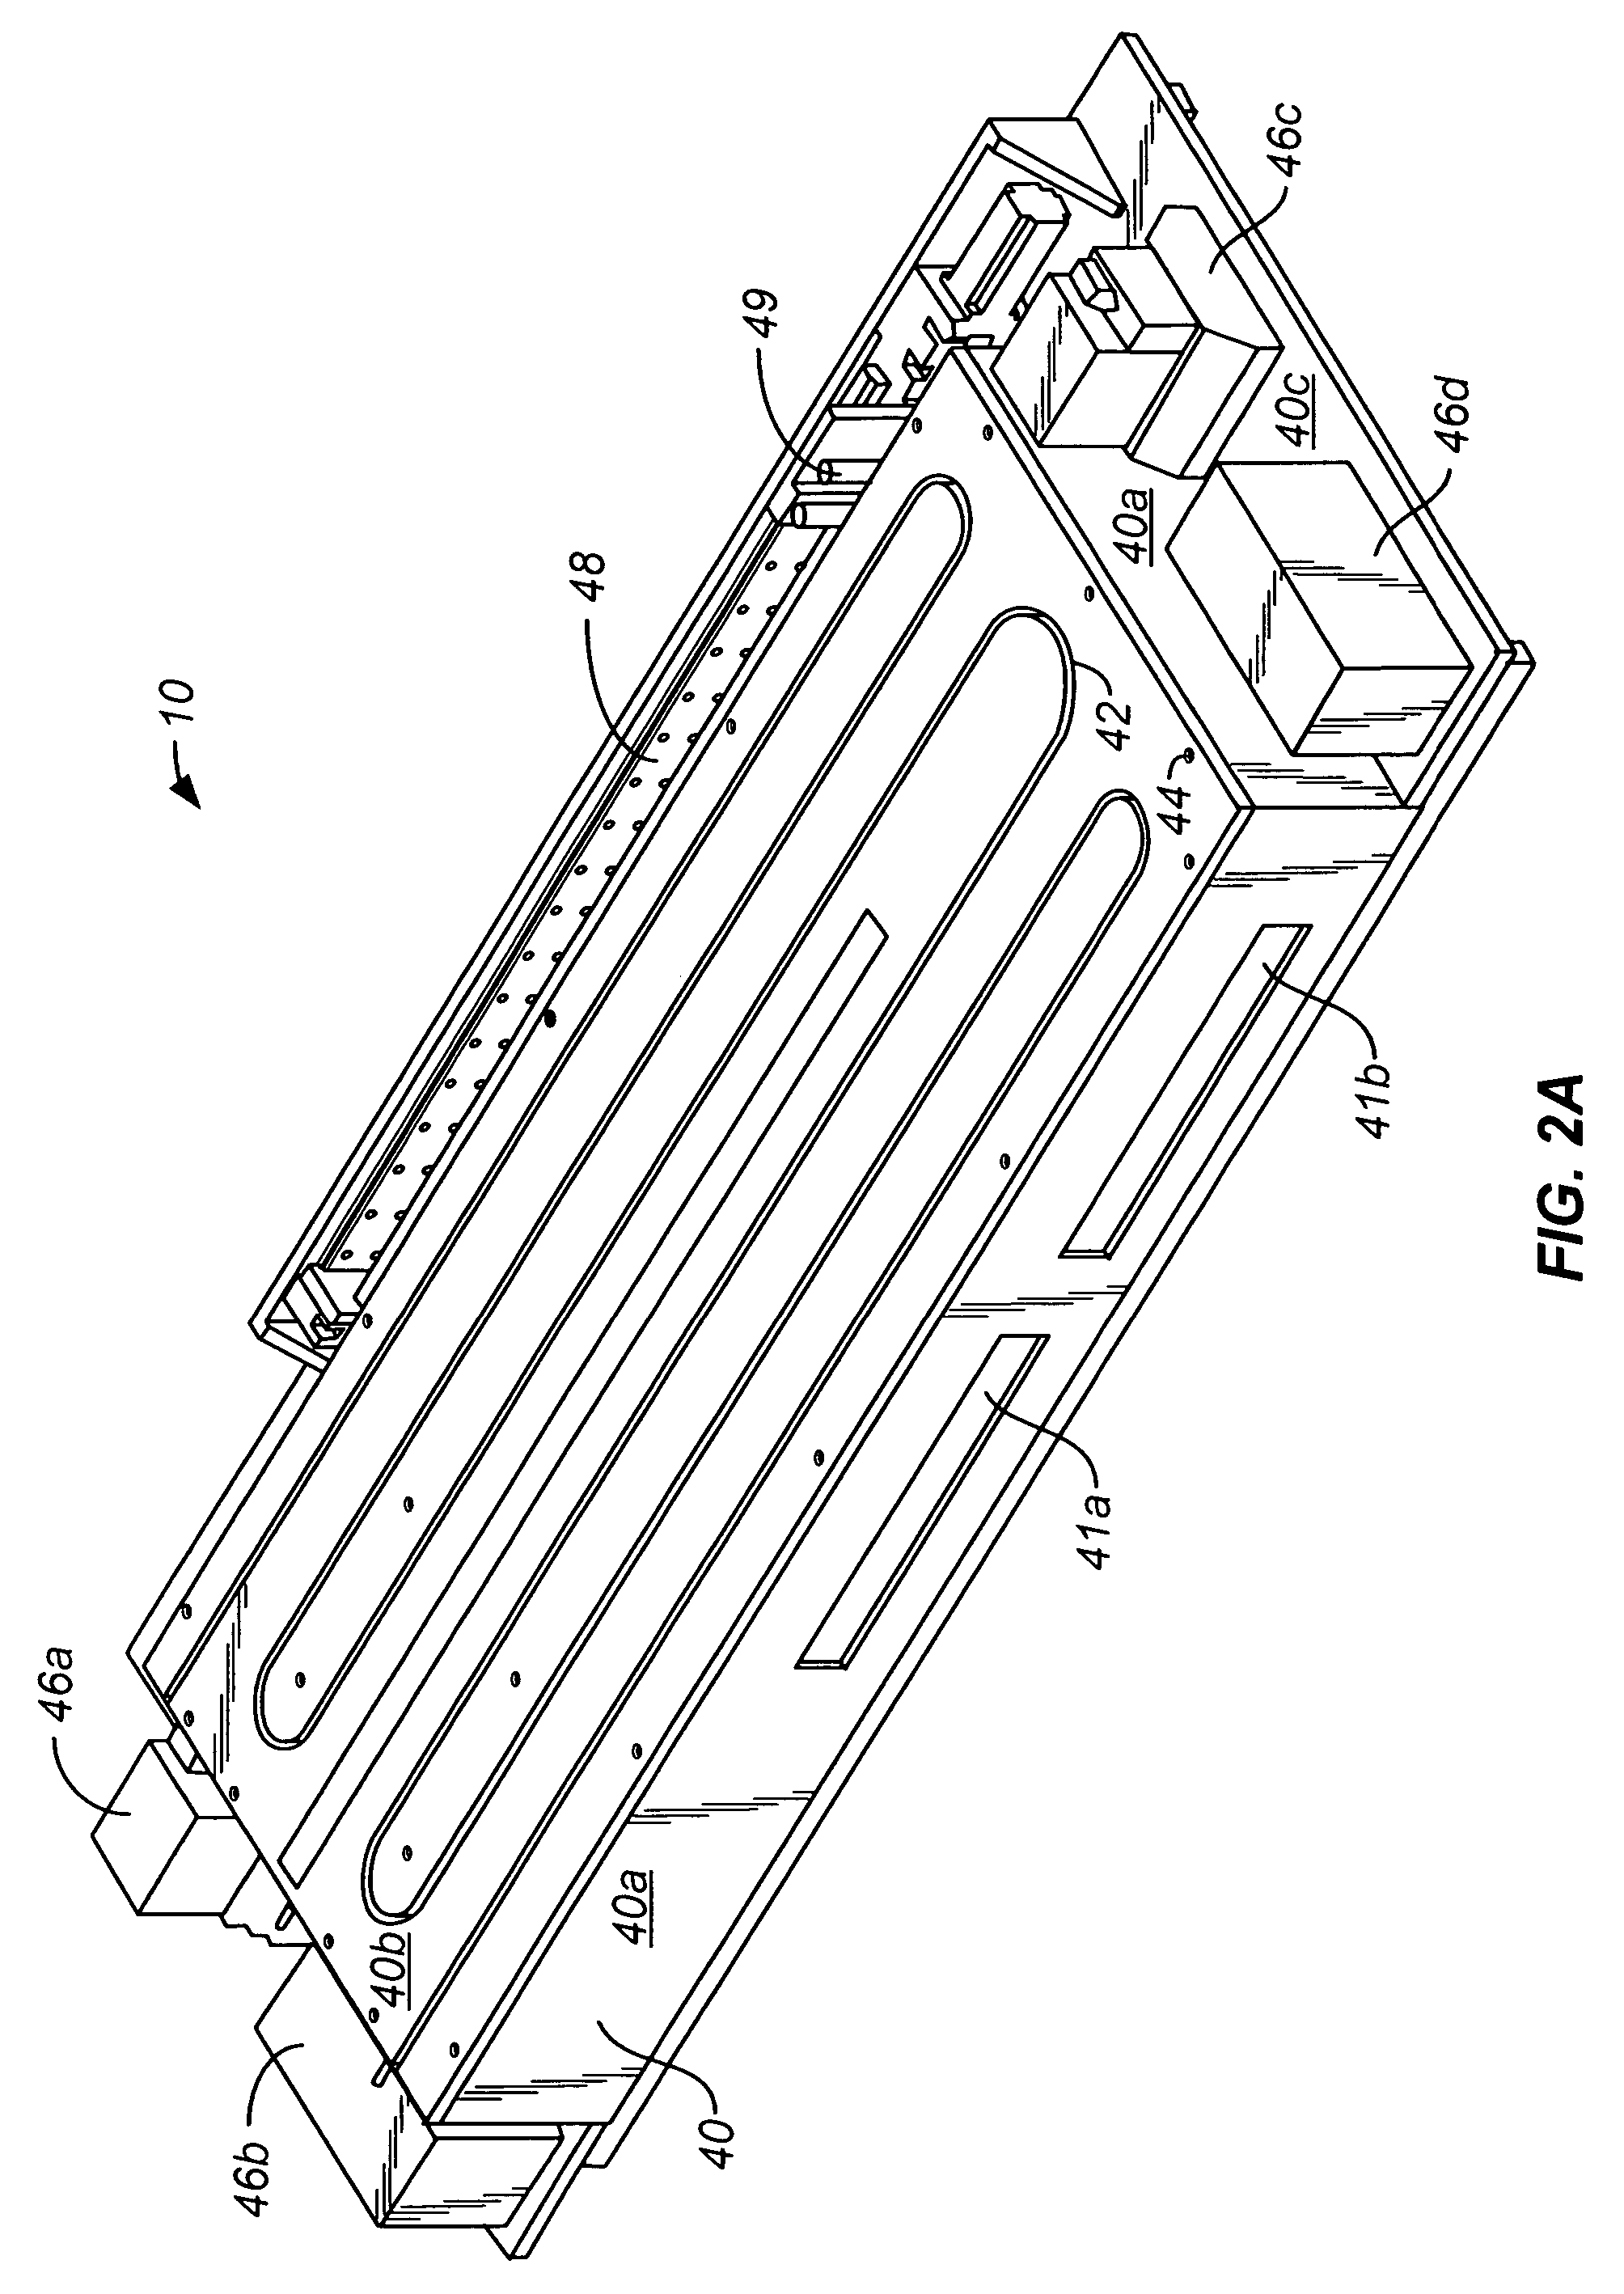 Integrated thermal unit having laterally adjacent bake and chill plates on different planes